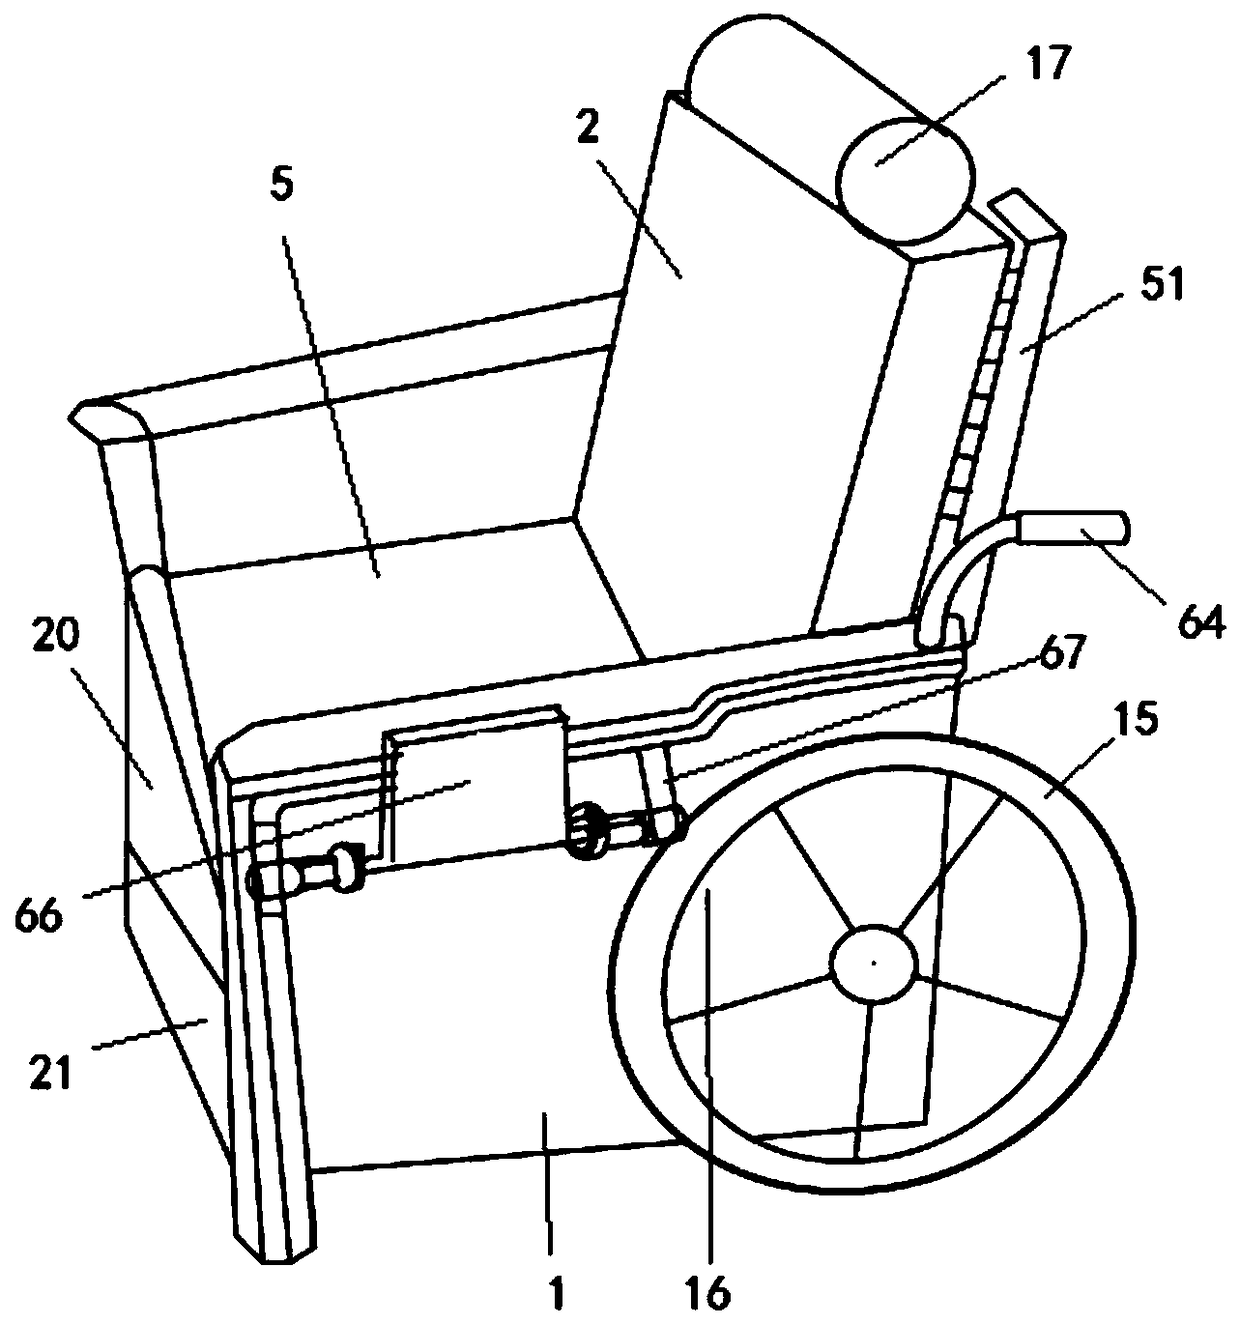 A wheeled sofa for the elderly with a folding table